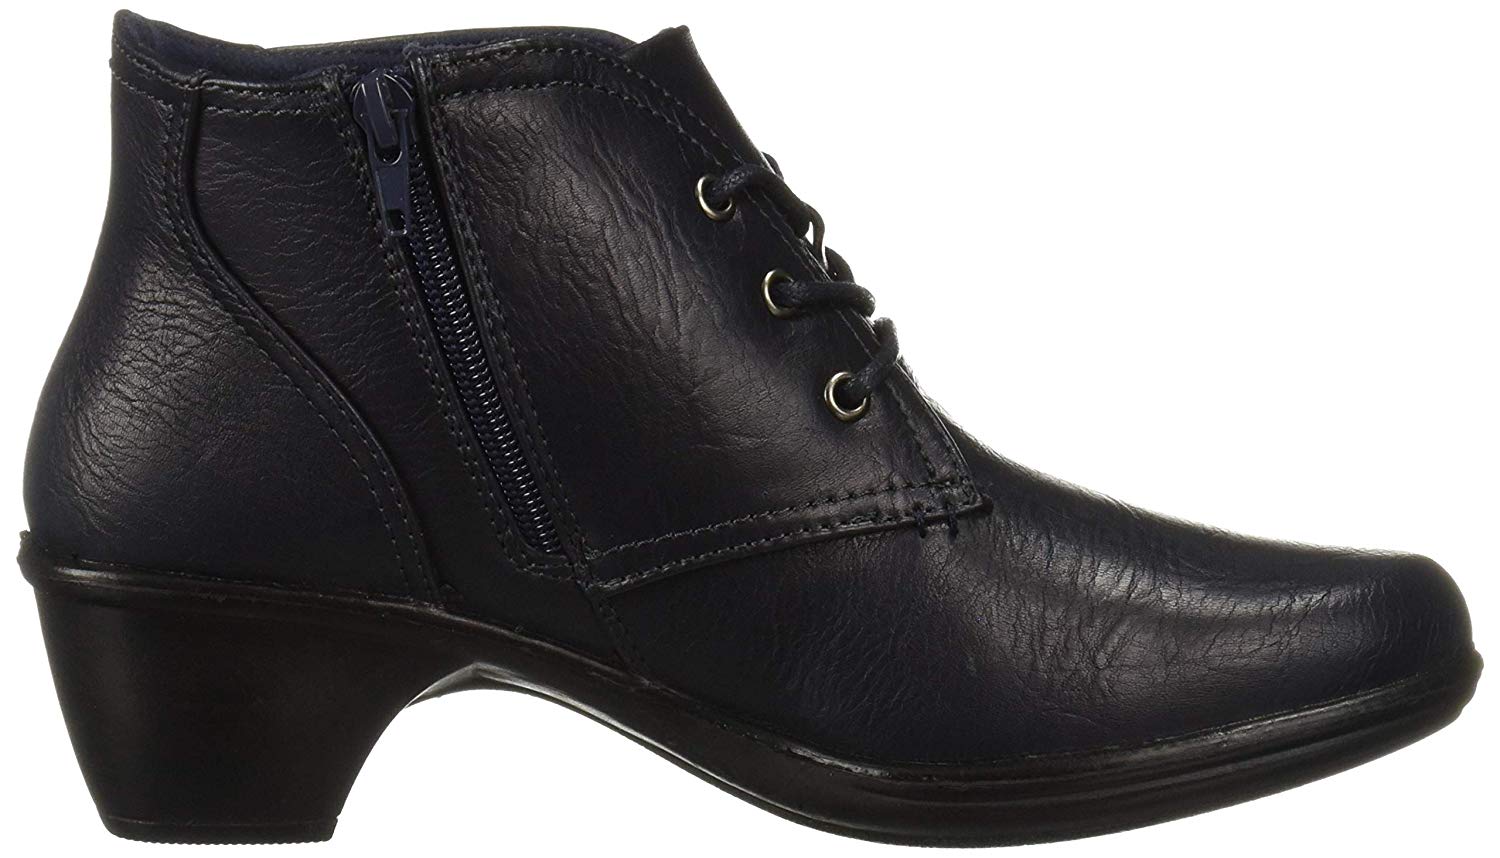 Easy Street Womens 30-9137 Round Toe Ankle Fashion Boots, Navy, Size 7. ...